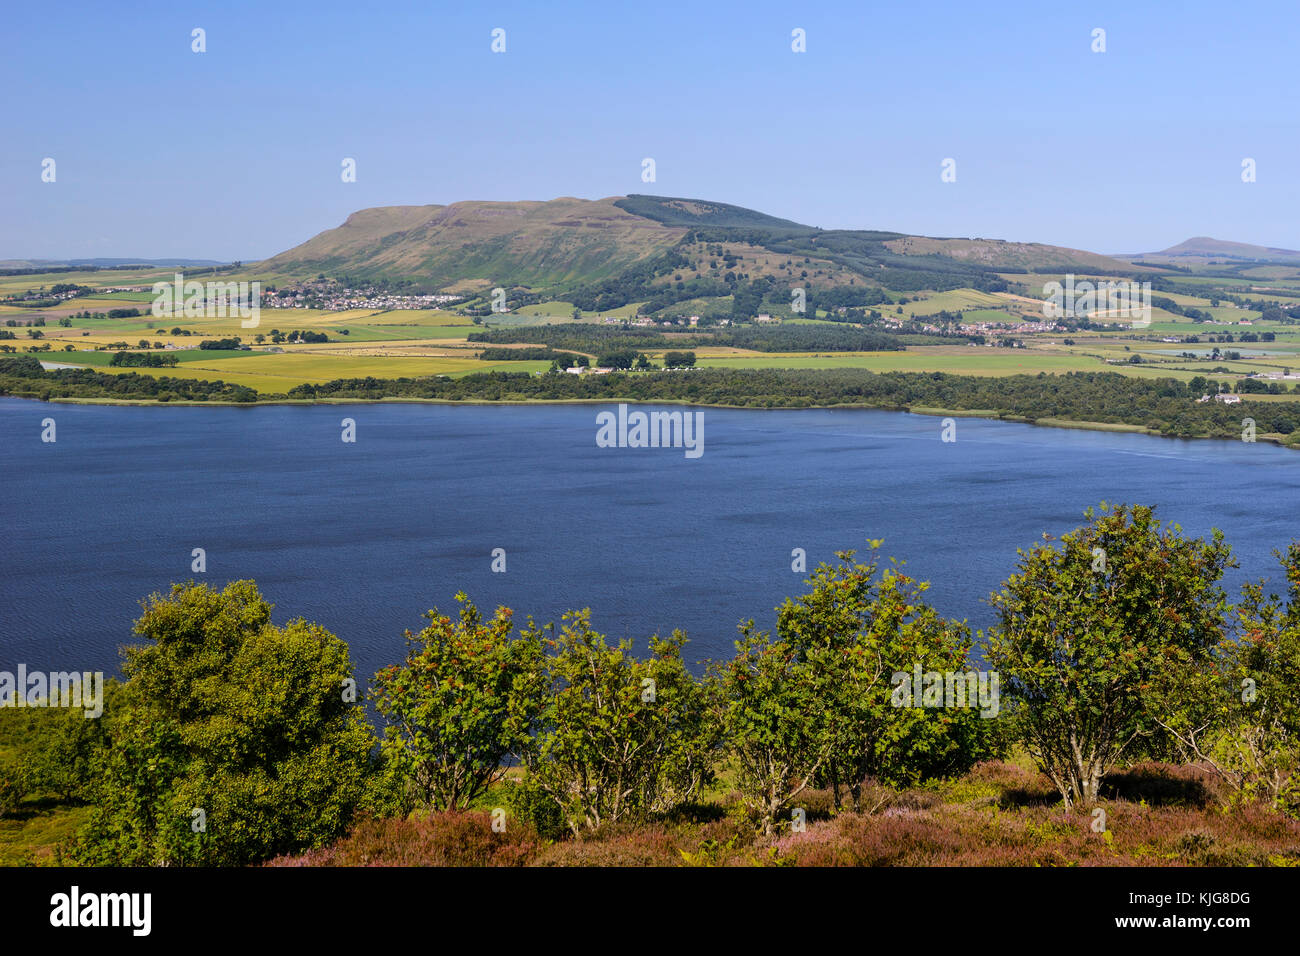 View across Loch Leven to the Lomond Hills from the slopes of Benarty Hill, Perth and Kinross, Scotland Stock Photo